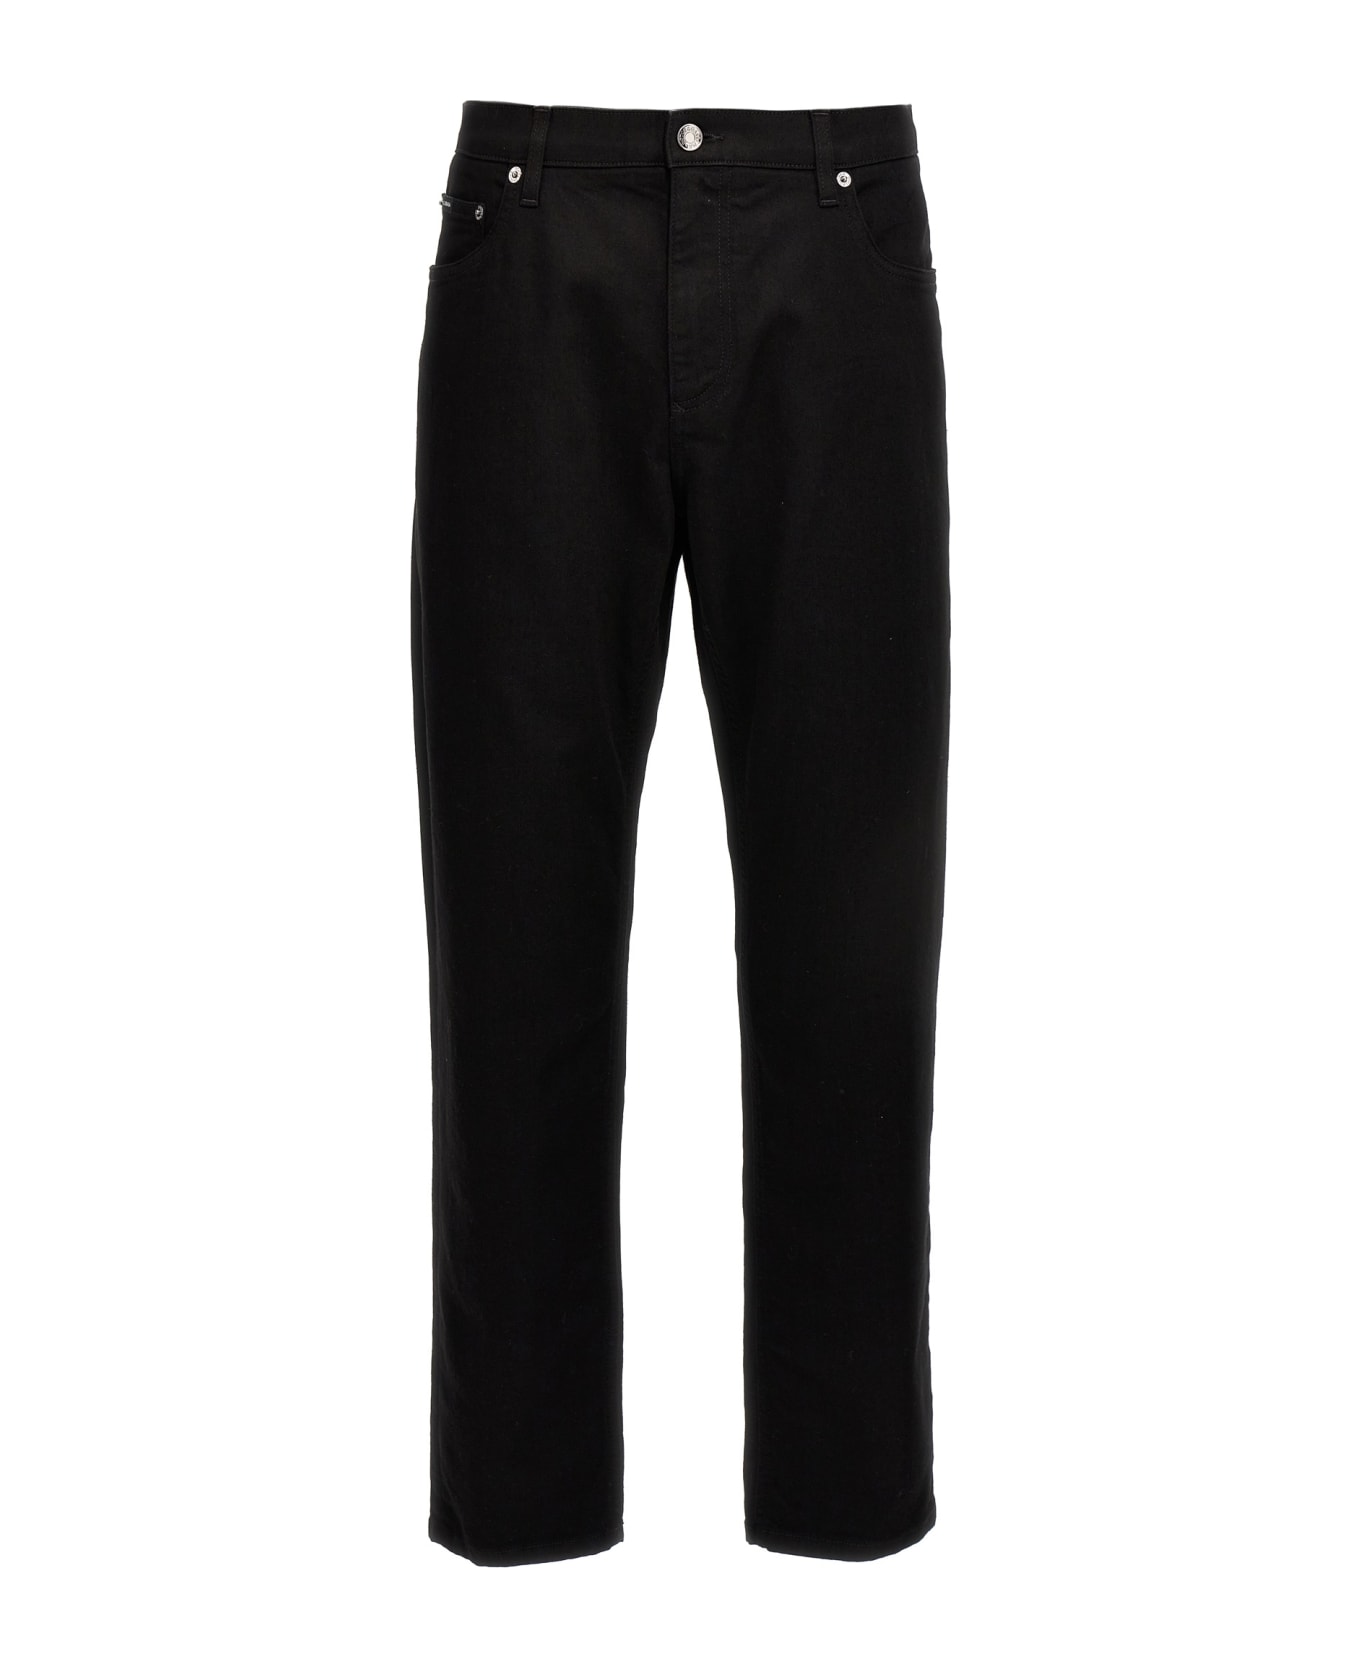 Dolce & Gabbana Loose-fit Jeans - Black ボトムス